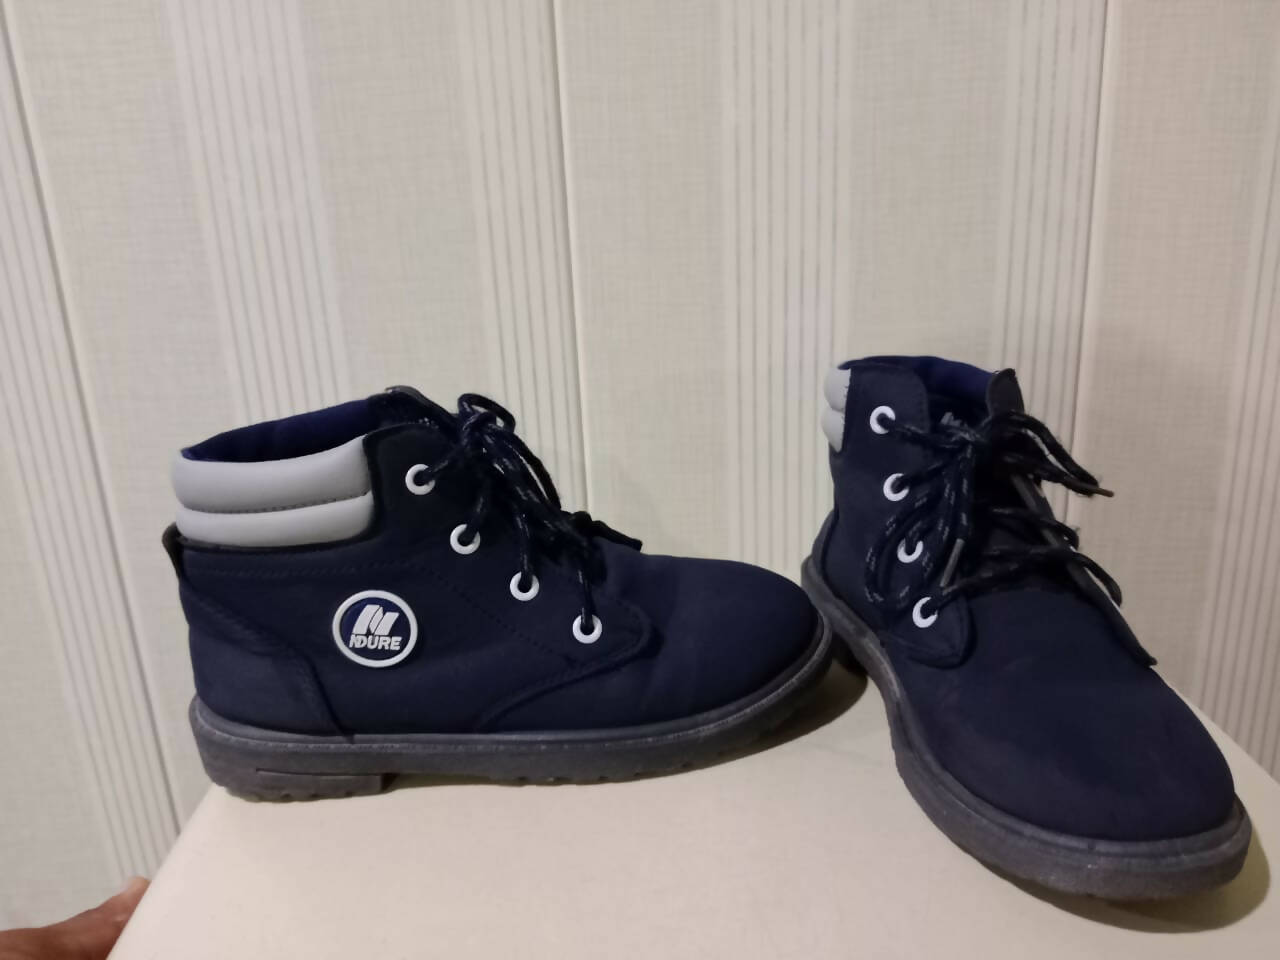 Ndure | Boys Shoes & Accessories | Size: 34 | Worn Once